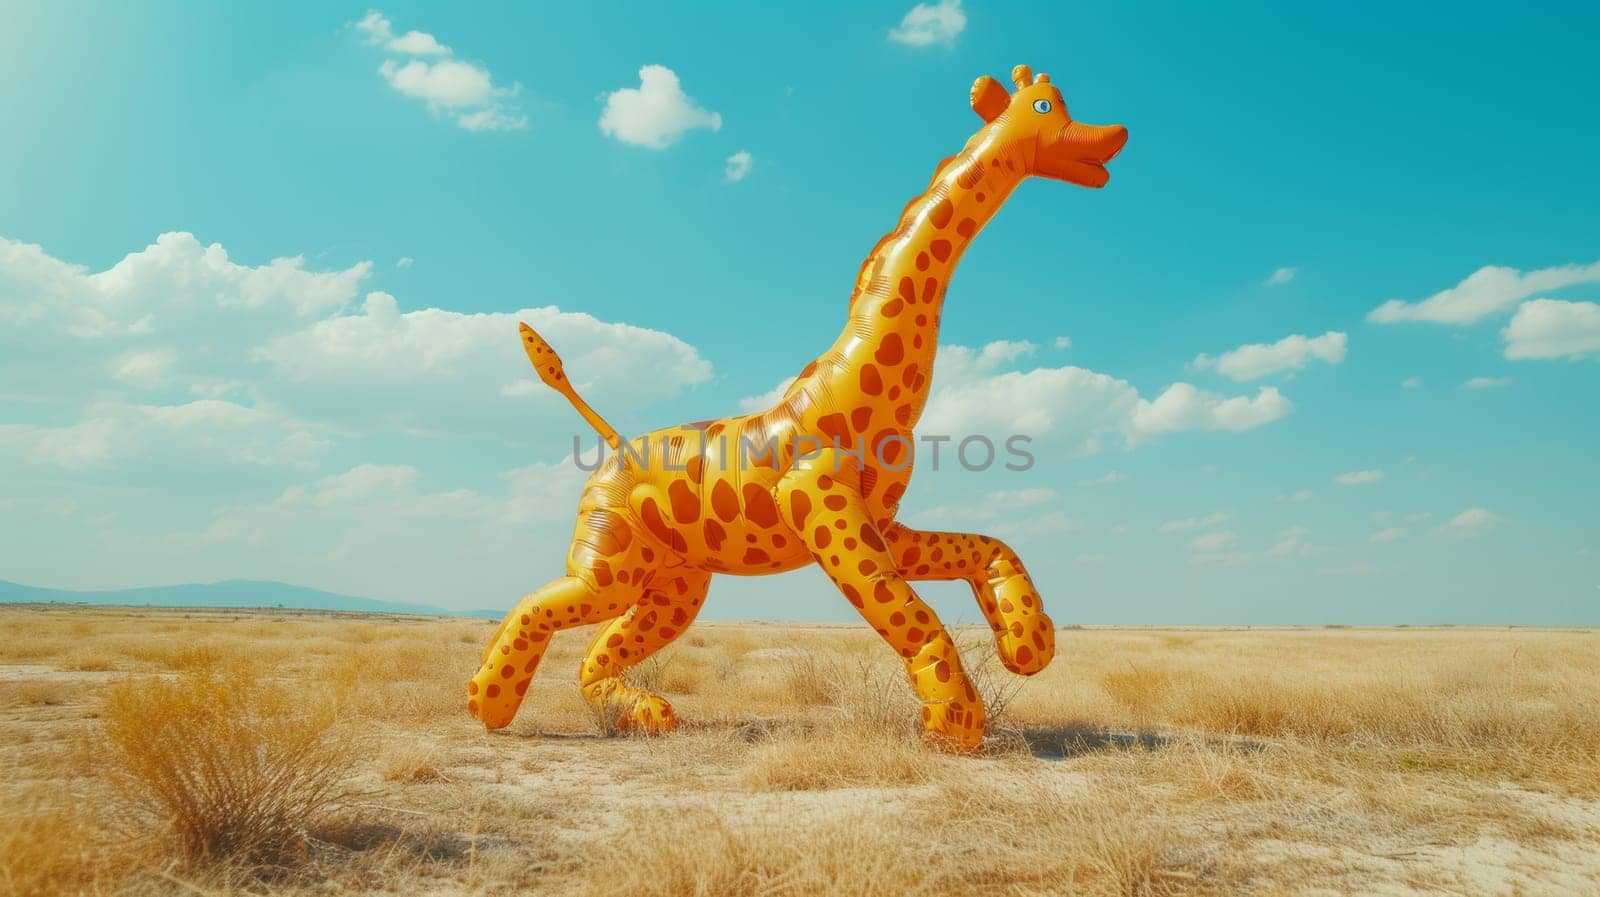 A large inflatable giraffe running through a dry grassy field